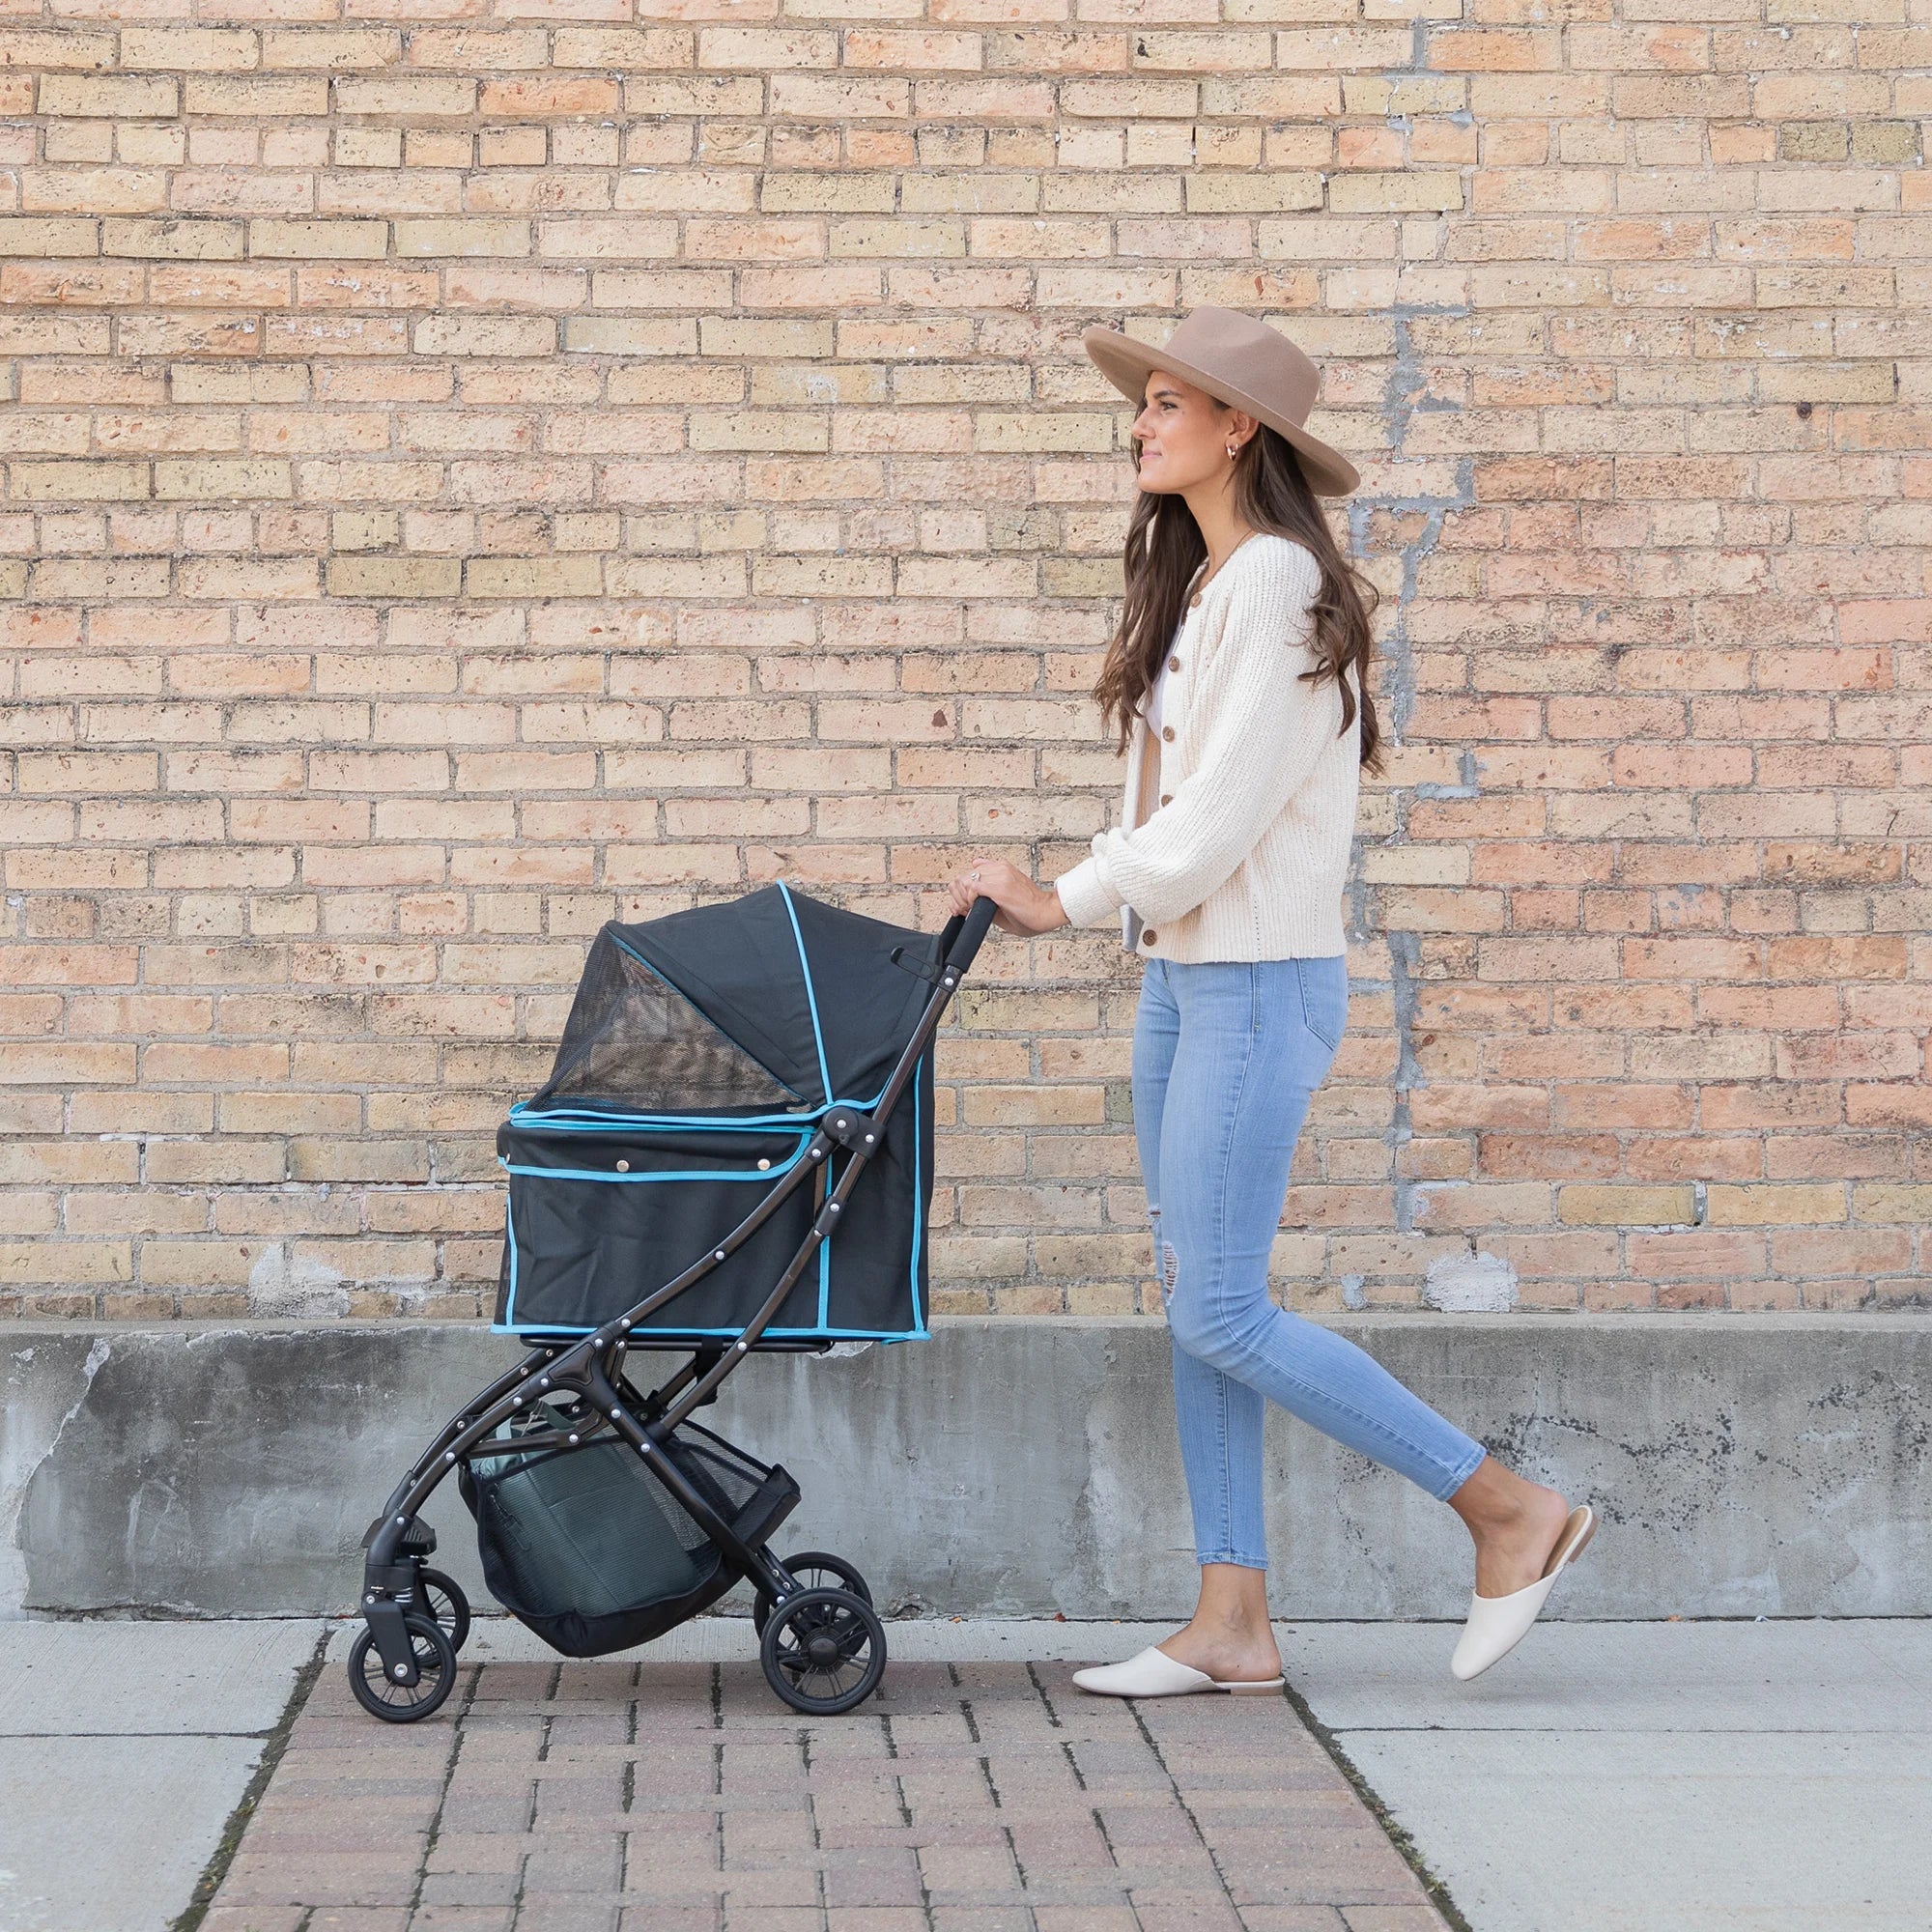 Woman with brown hair walking her black and white cat outside in an Easy Fold & Go Pet Stroller in front of a brick wall.